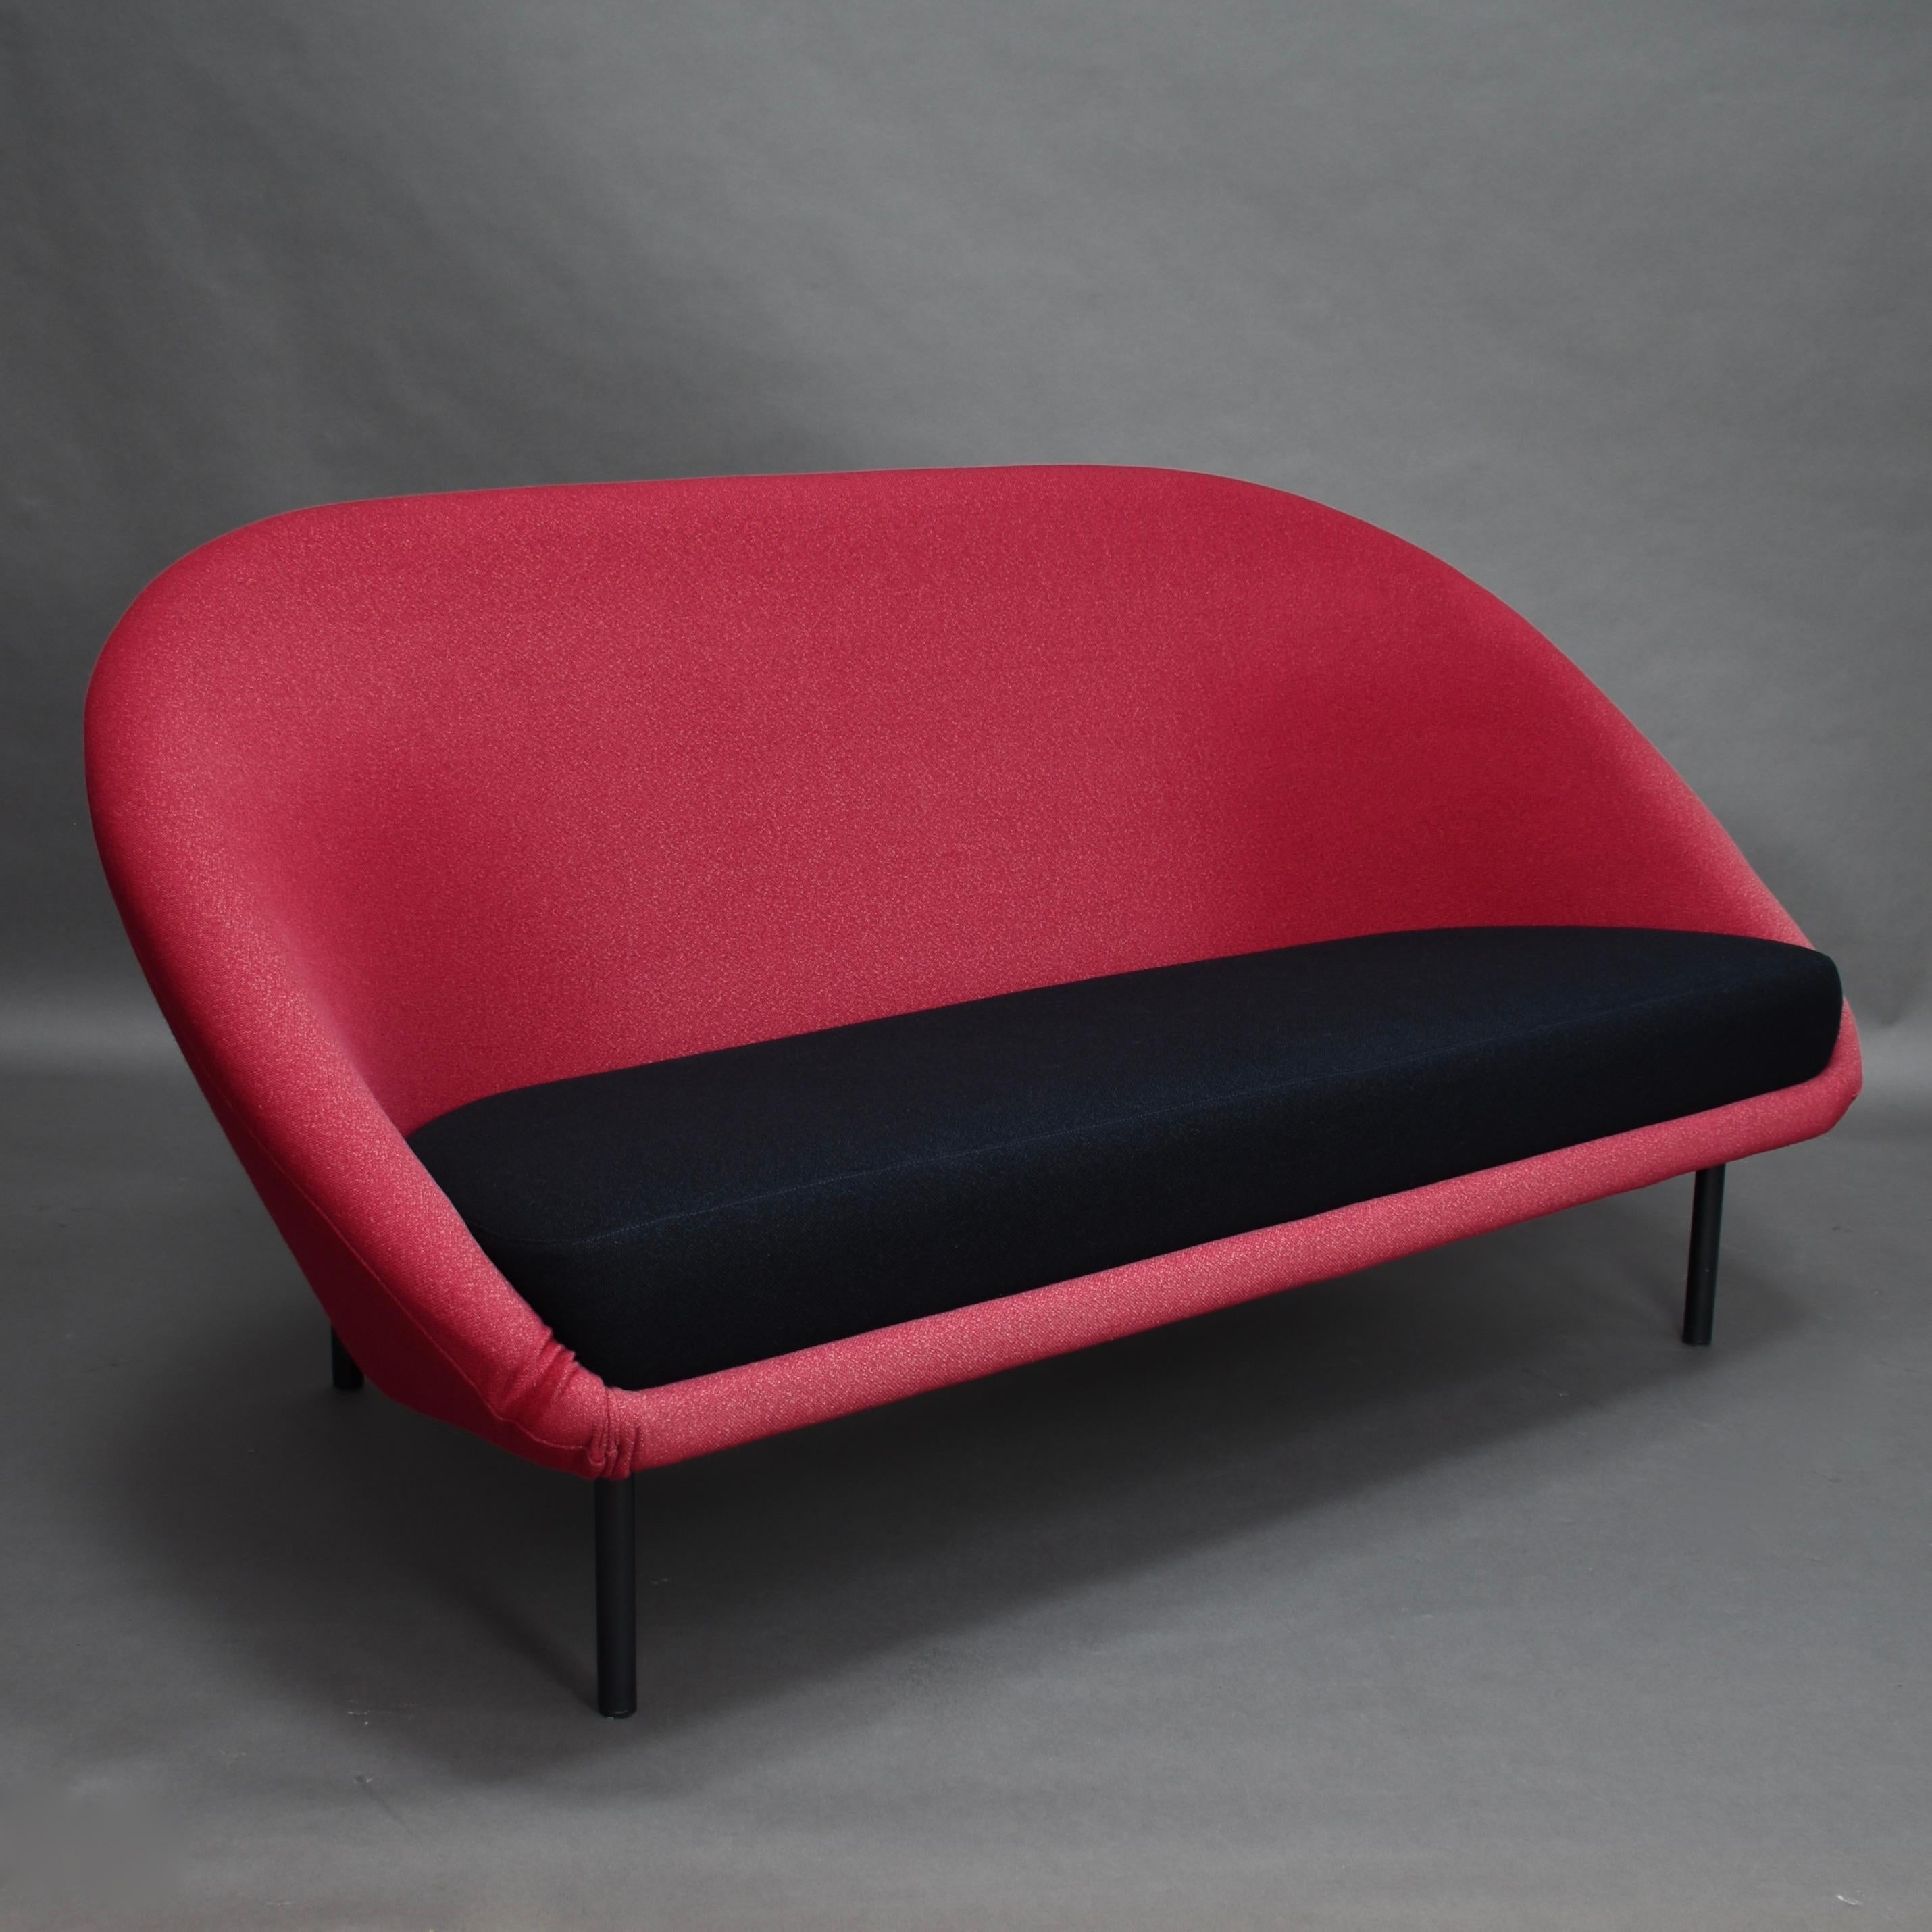 F815 sofa by Theo Ruth for Artifort, Netherlands, 1958.
This is are rare, amazing and sophisticated center-piece.

The sofa is upholstered in a wool fabric which has some fading.
The base is made of black lacquered metal.

Designer: Theo